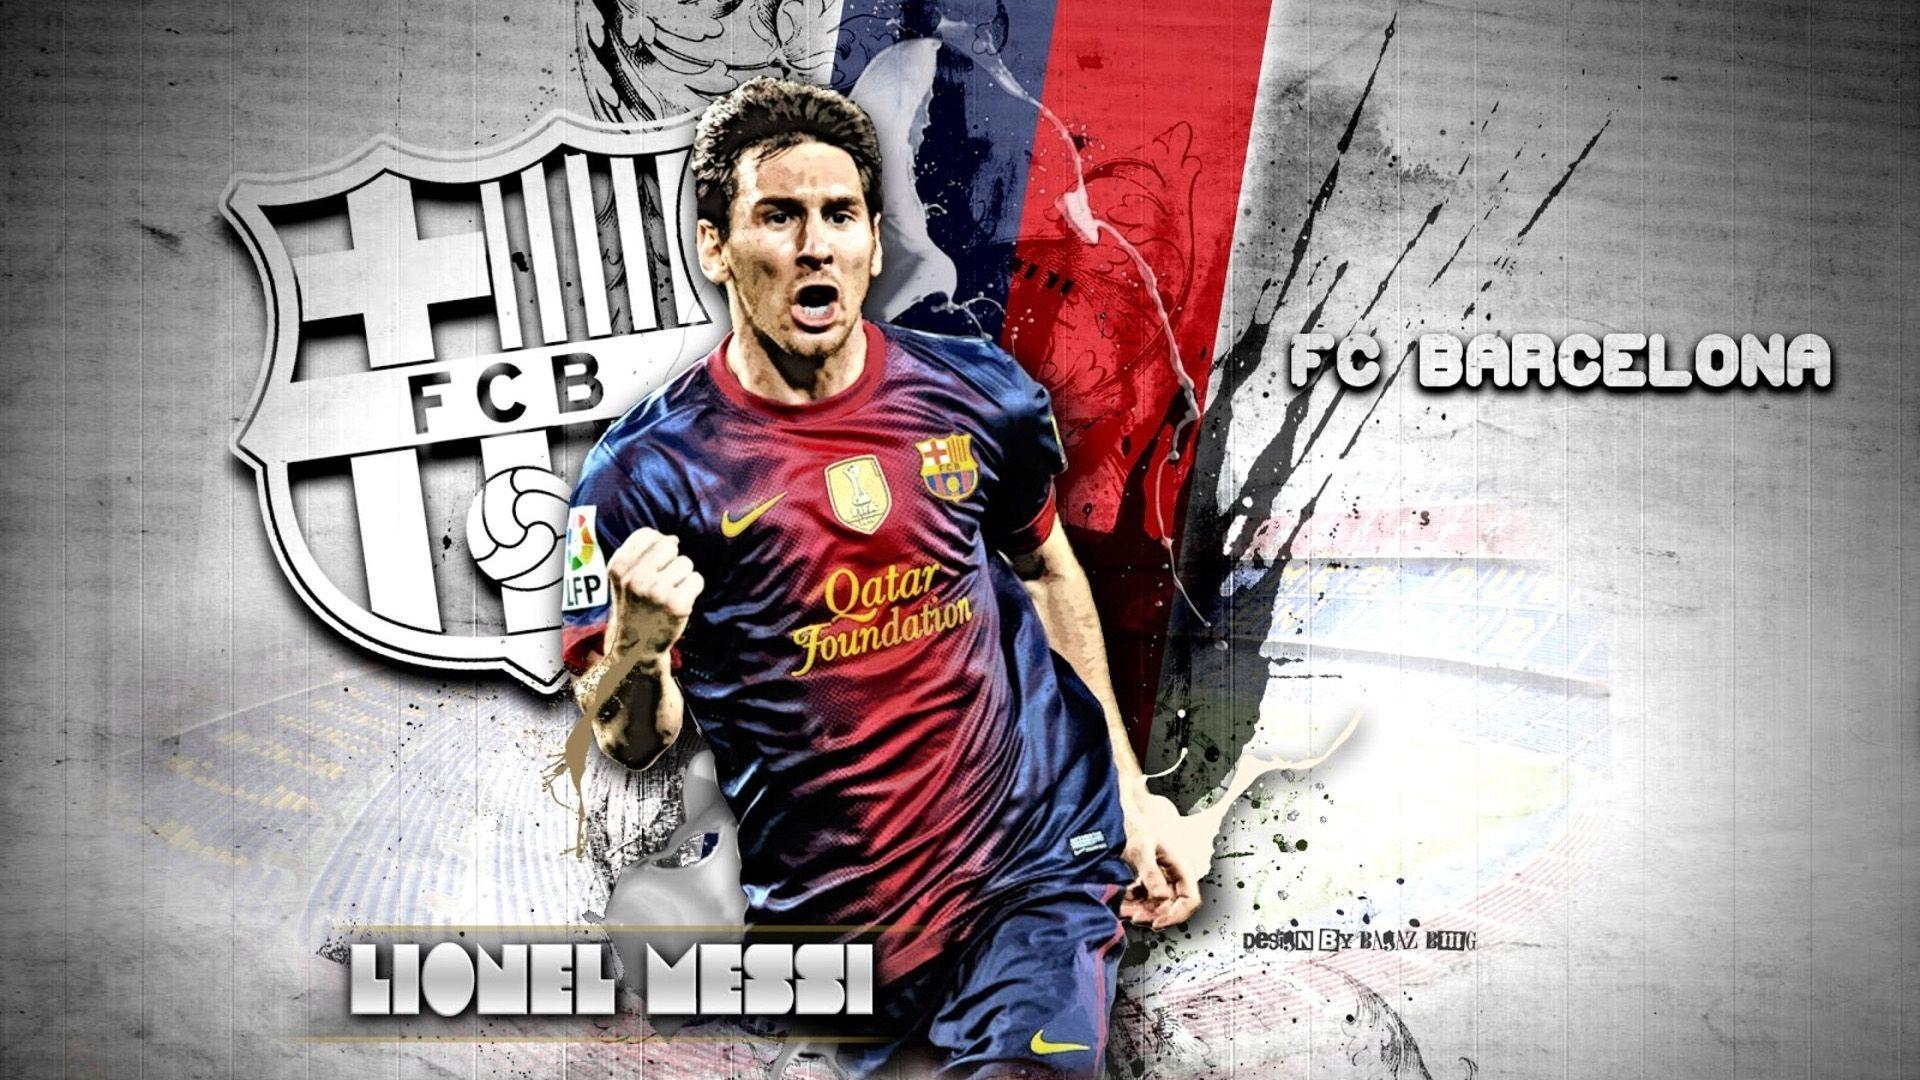 Messi 2017 wallpaper music ios icon image gold canyon